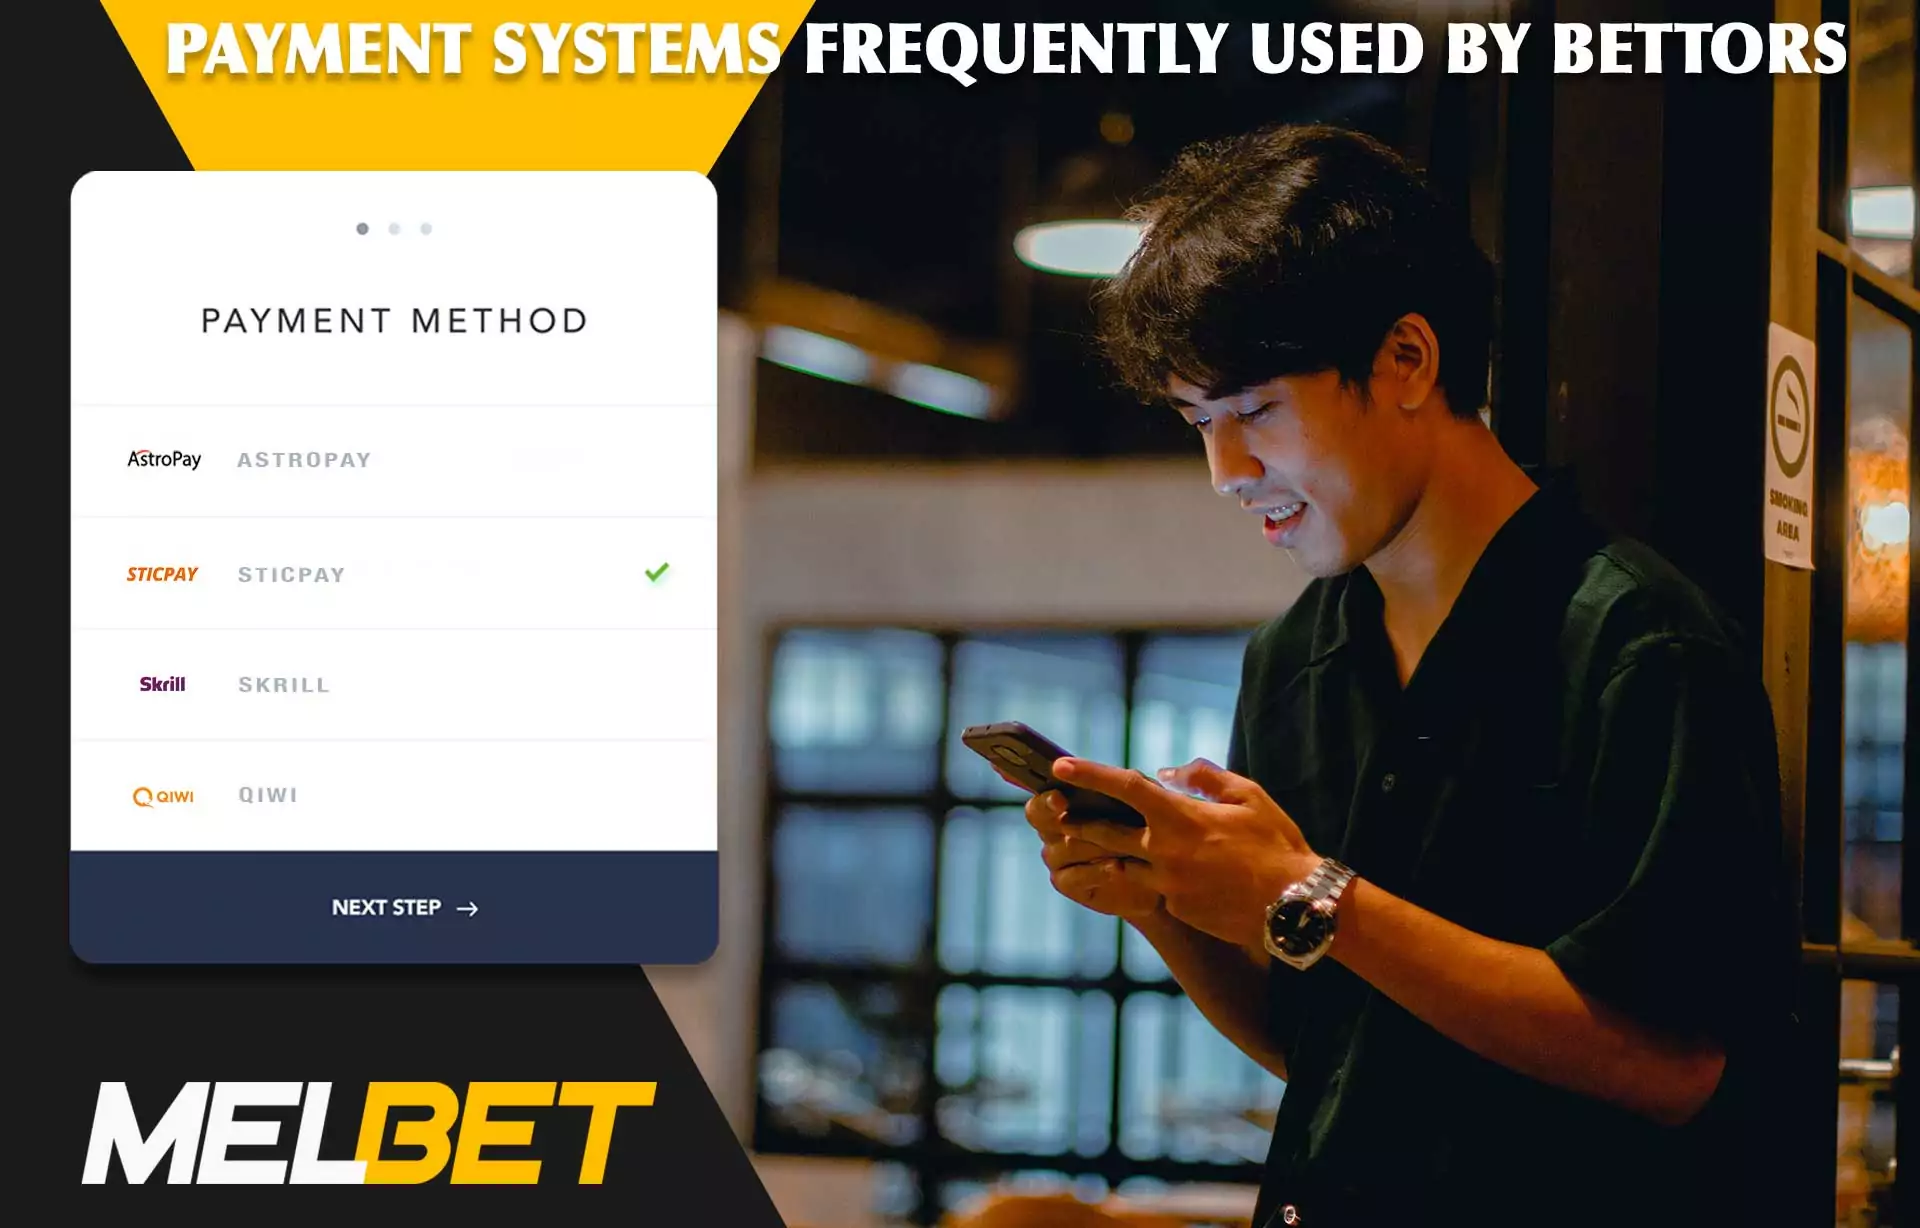 Skrill, QIWI and Sticpay are the most popular choice of electronic wallets among melbet users.